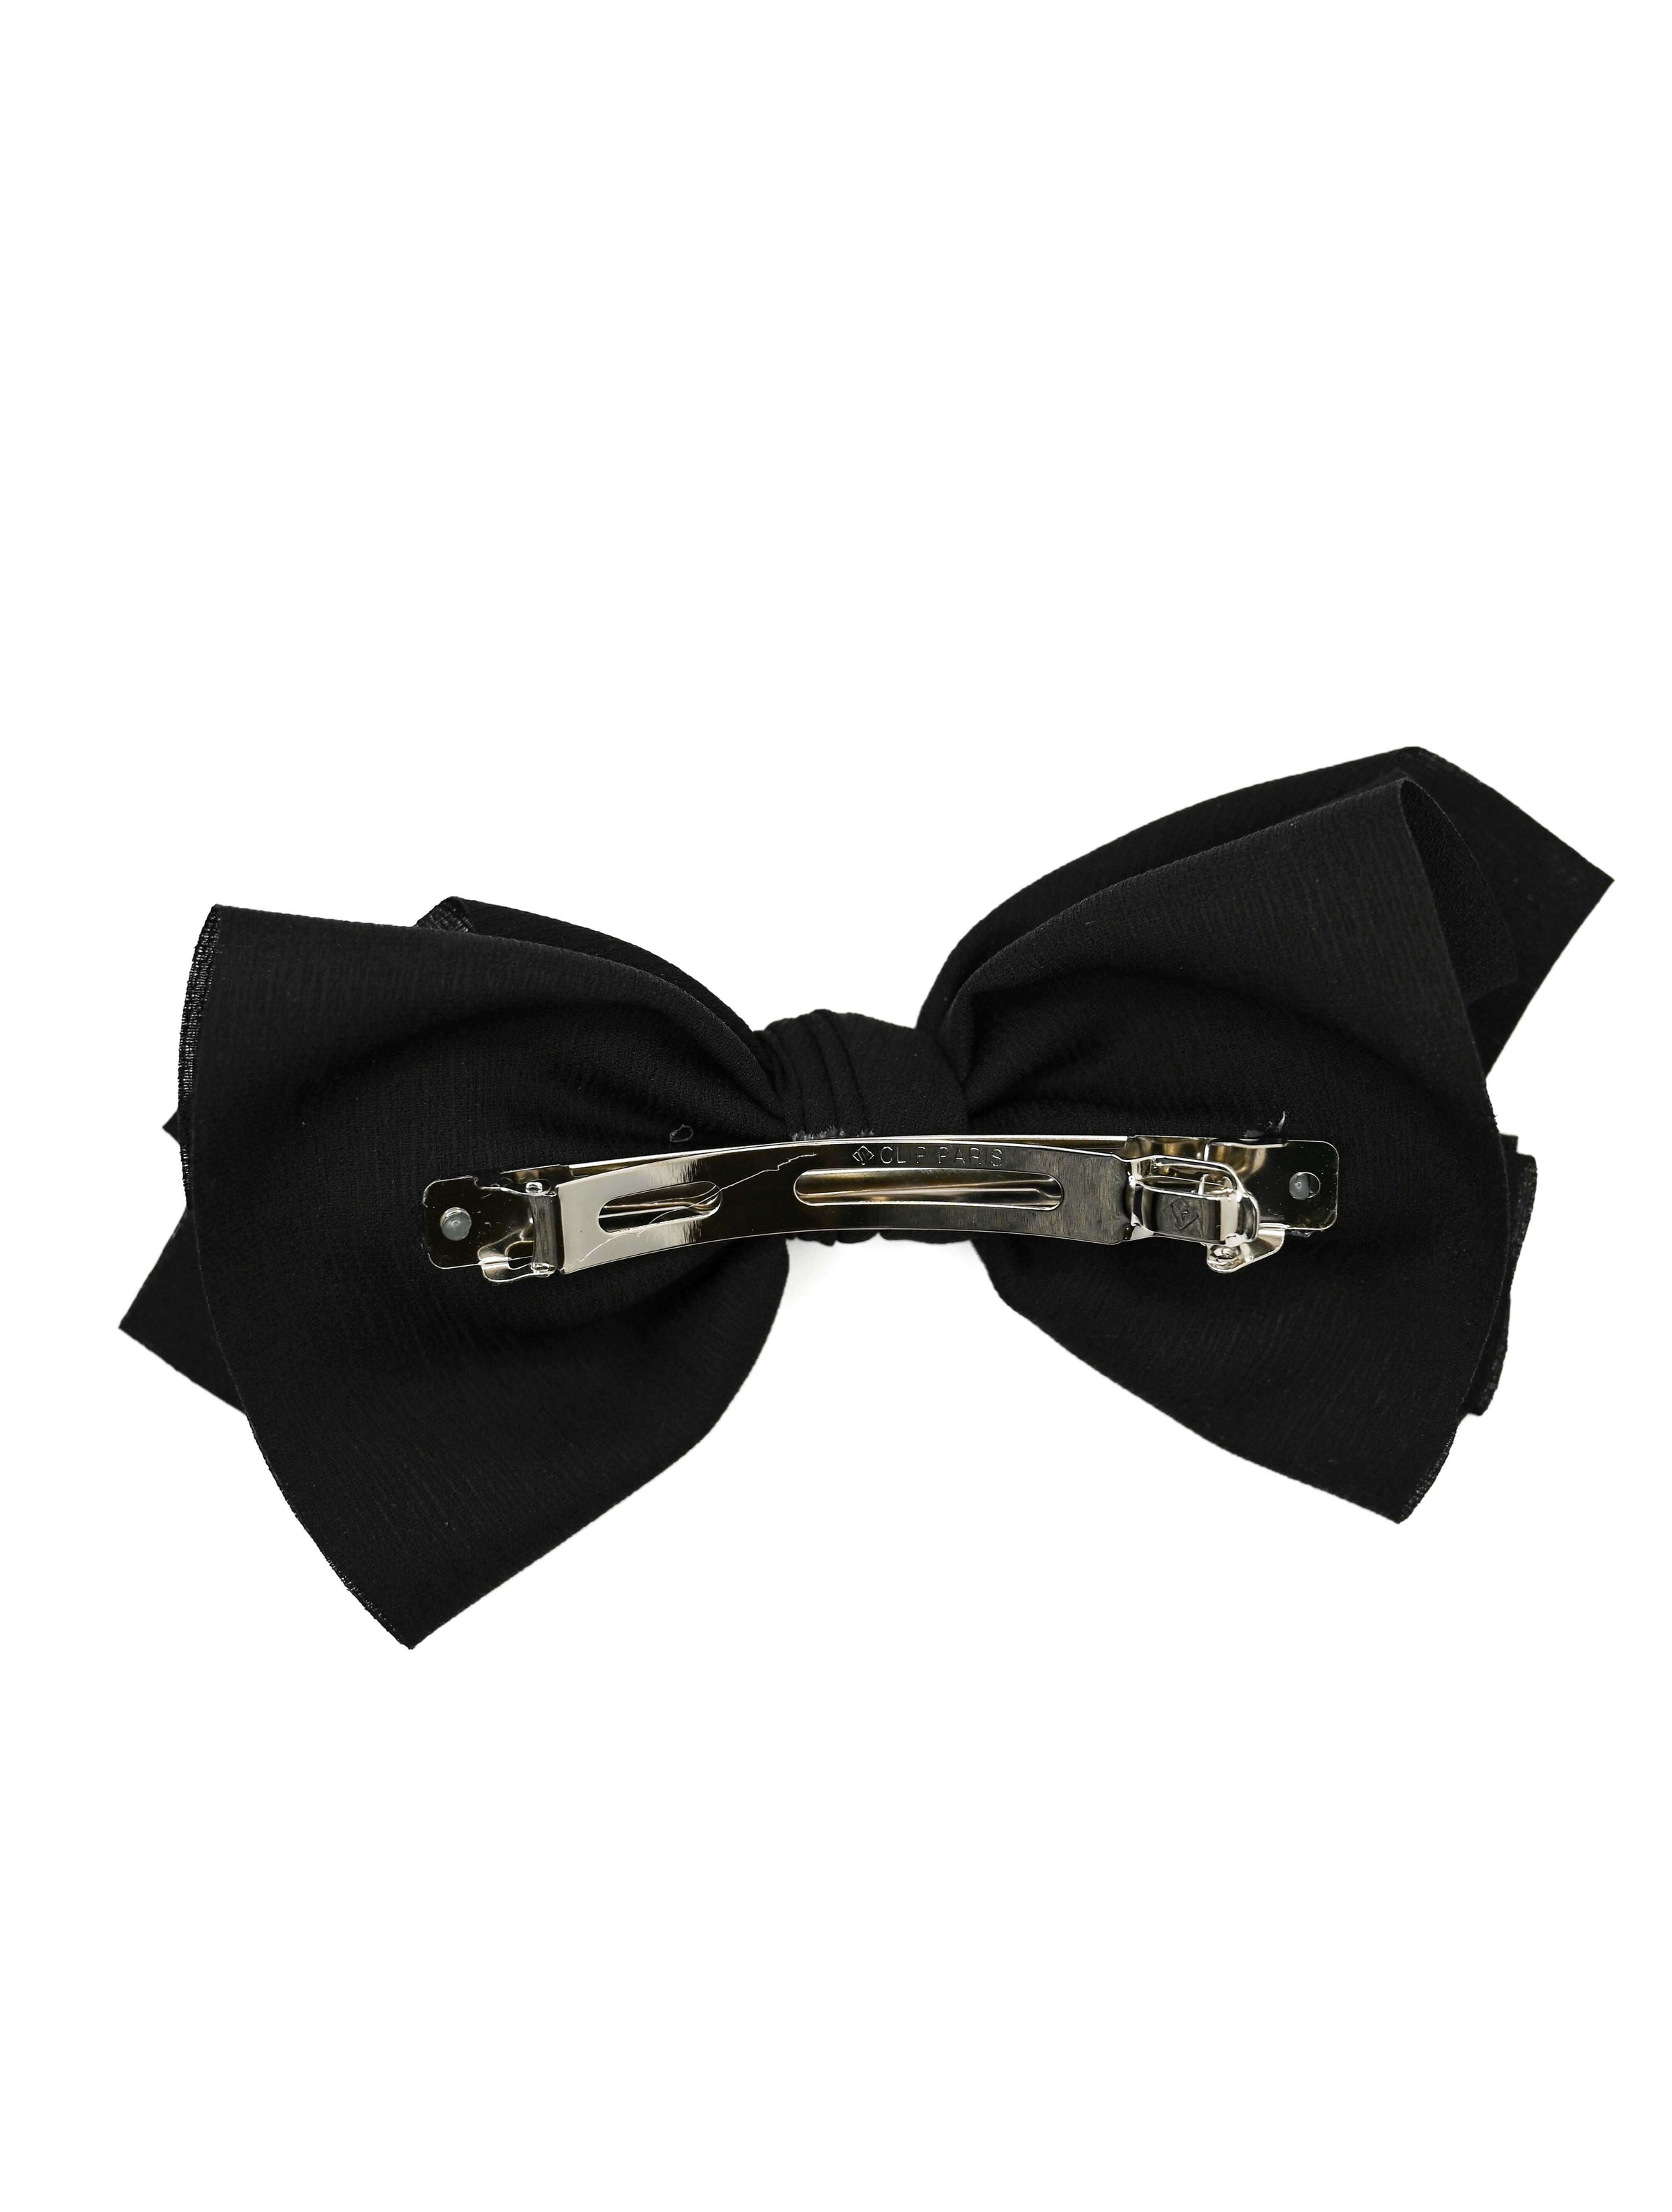 Multi Layered Knotted Bow Hair Clip in Black